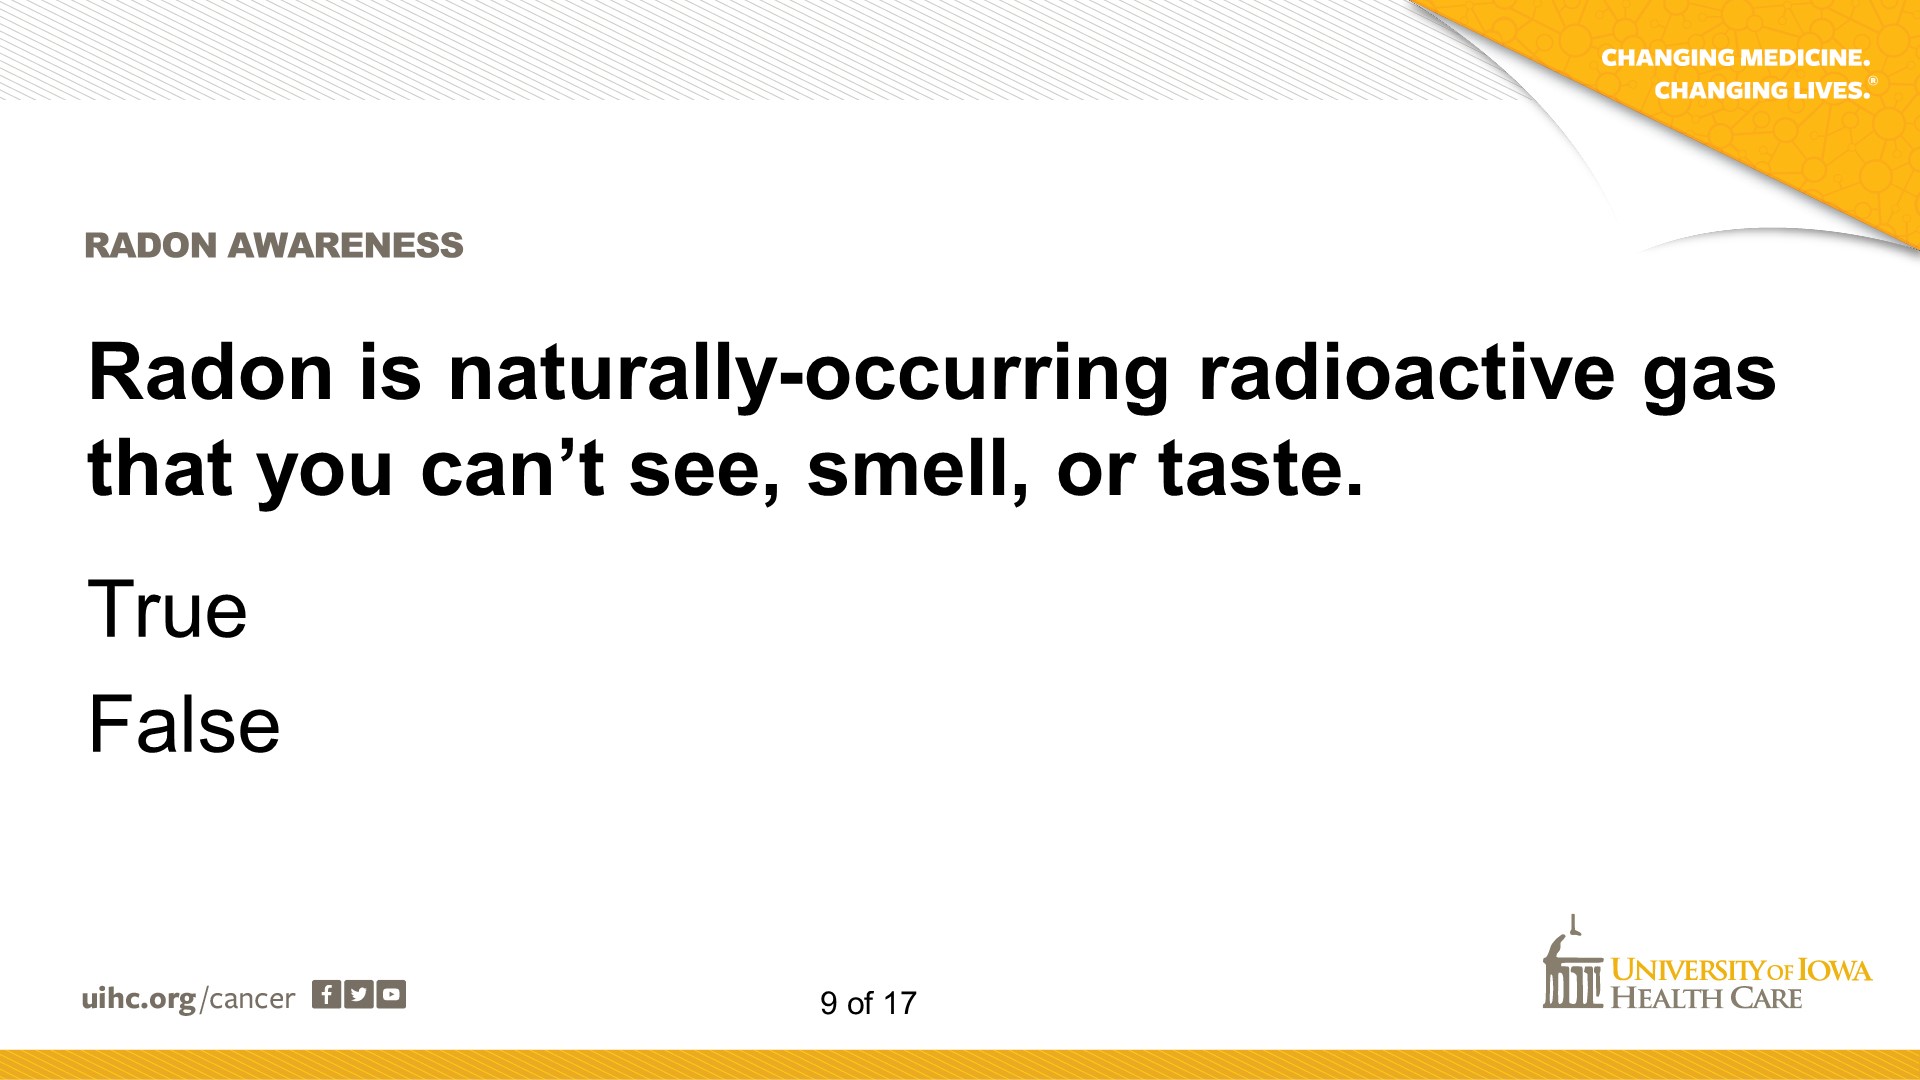 Radon is naturally-occurring radioactive gas that you can’t see, smell, or taste.